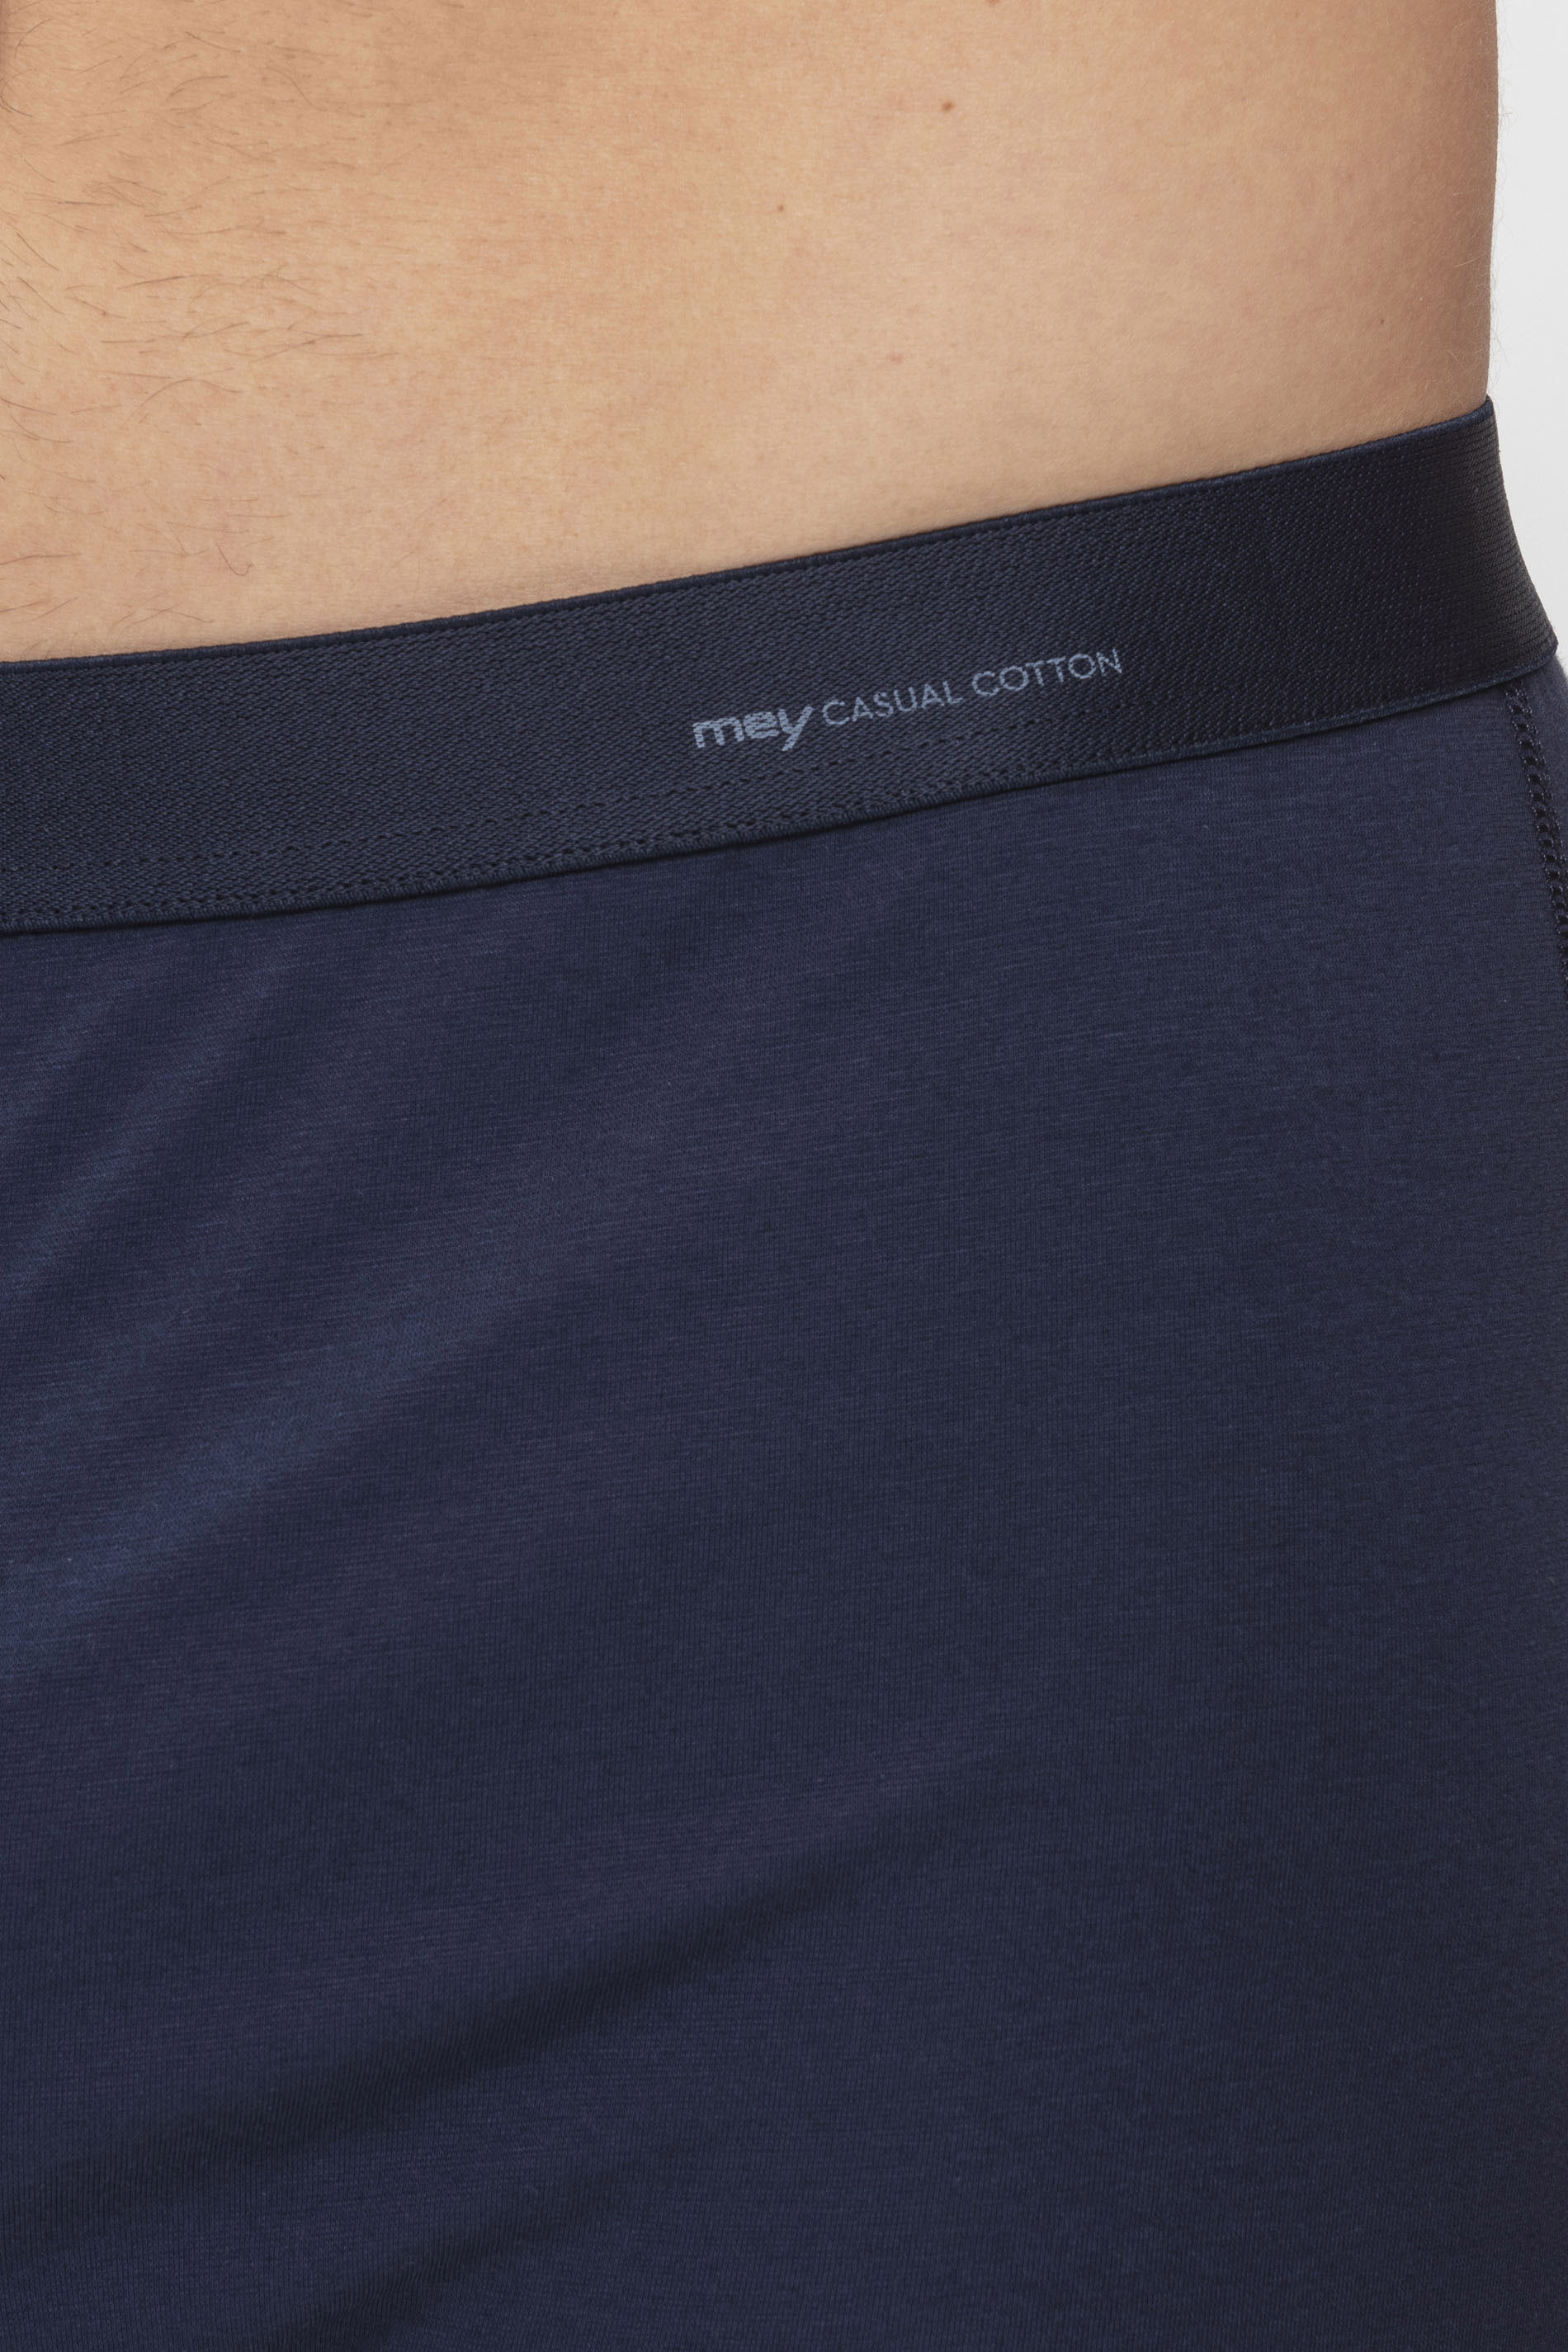 Track shorts Yacht Blue Serie Casual Cotton Detail View 01 | mey®